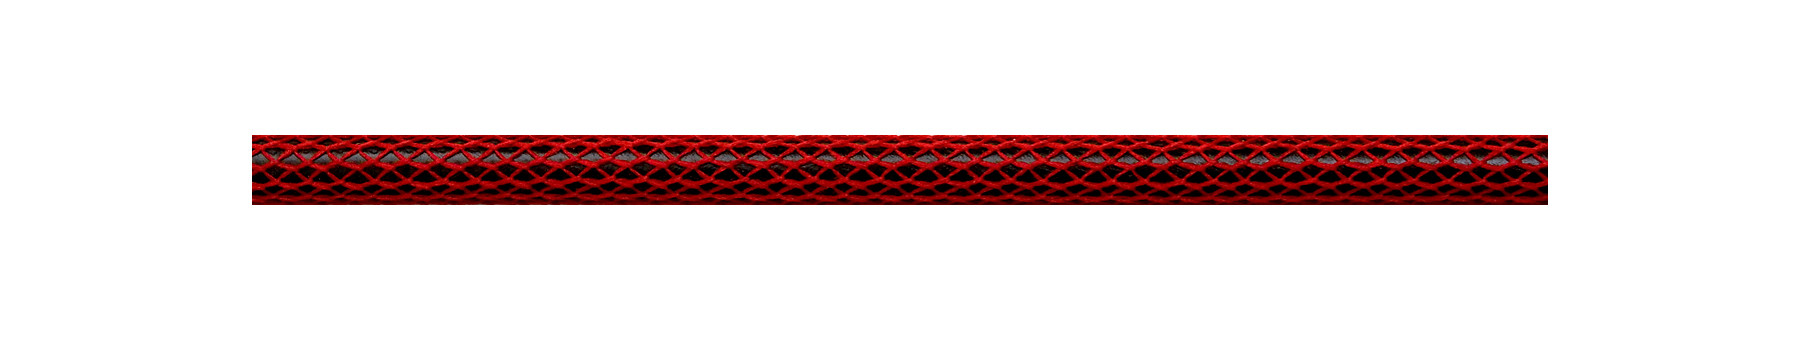 Textile Cable Red Netlike Textile Covering